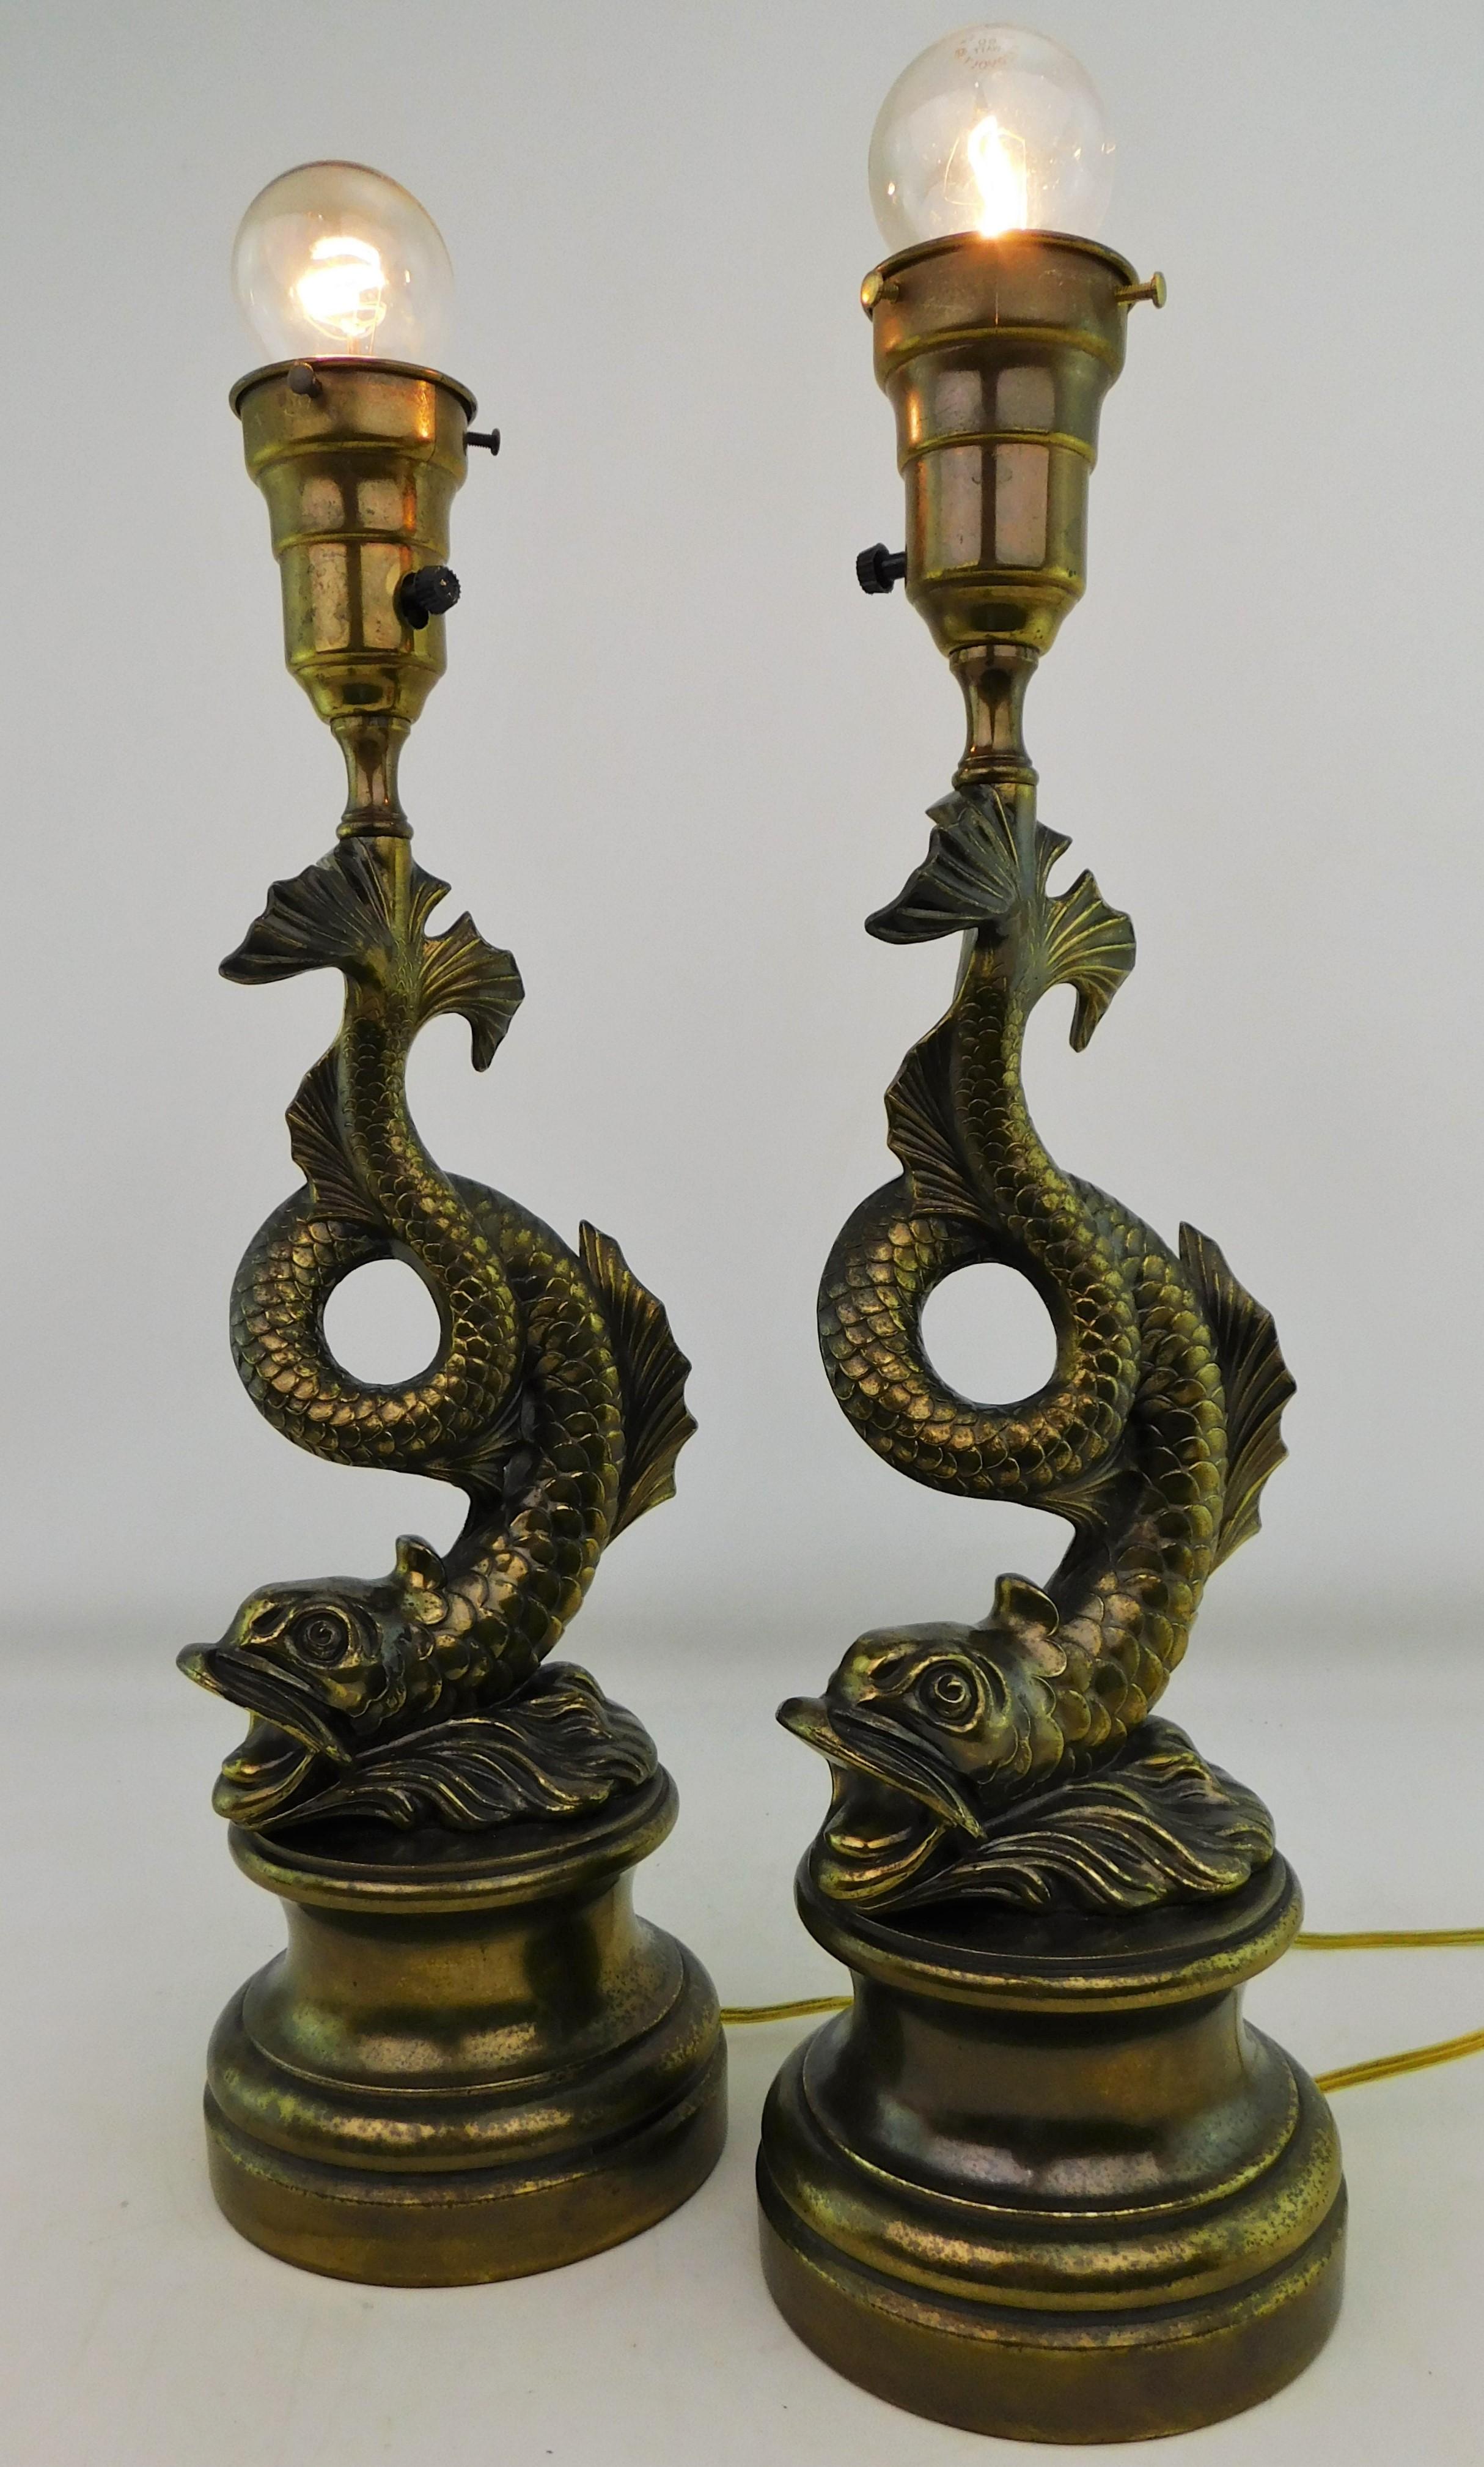 Pair of 1950s Stylized Japanese Design Dragon Serpentine Koi Fish Table Lamps For Sale 2